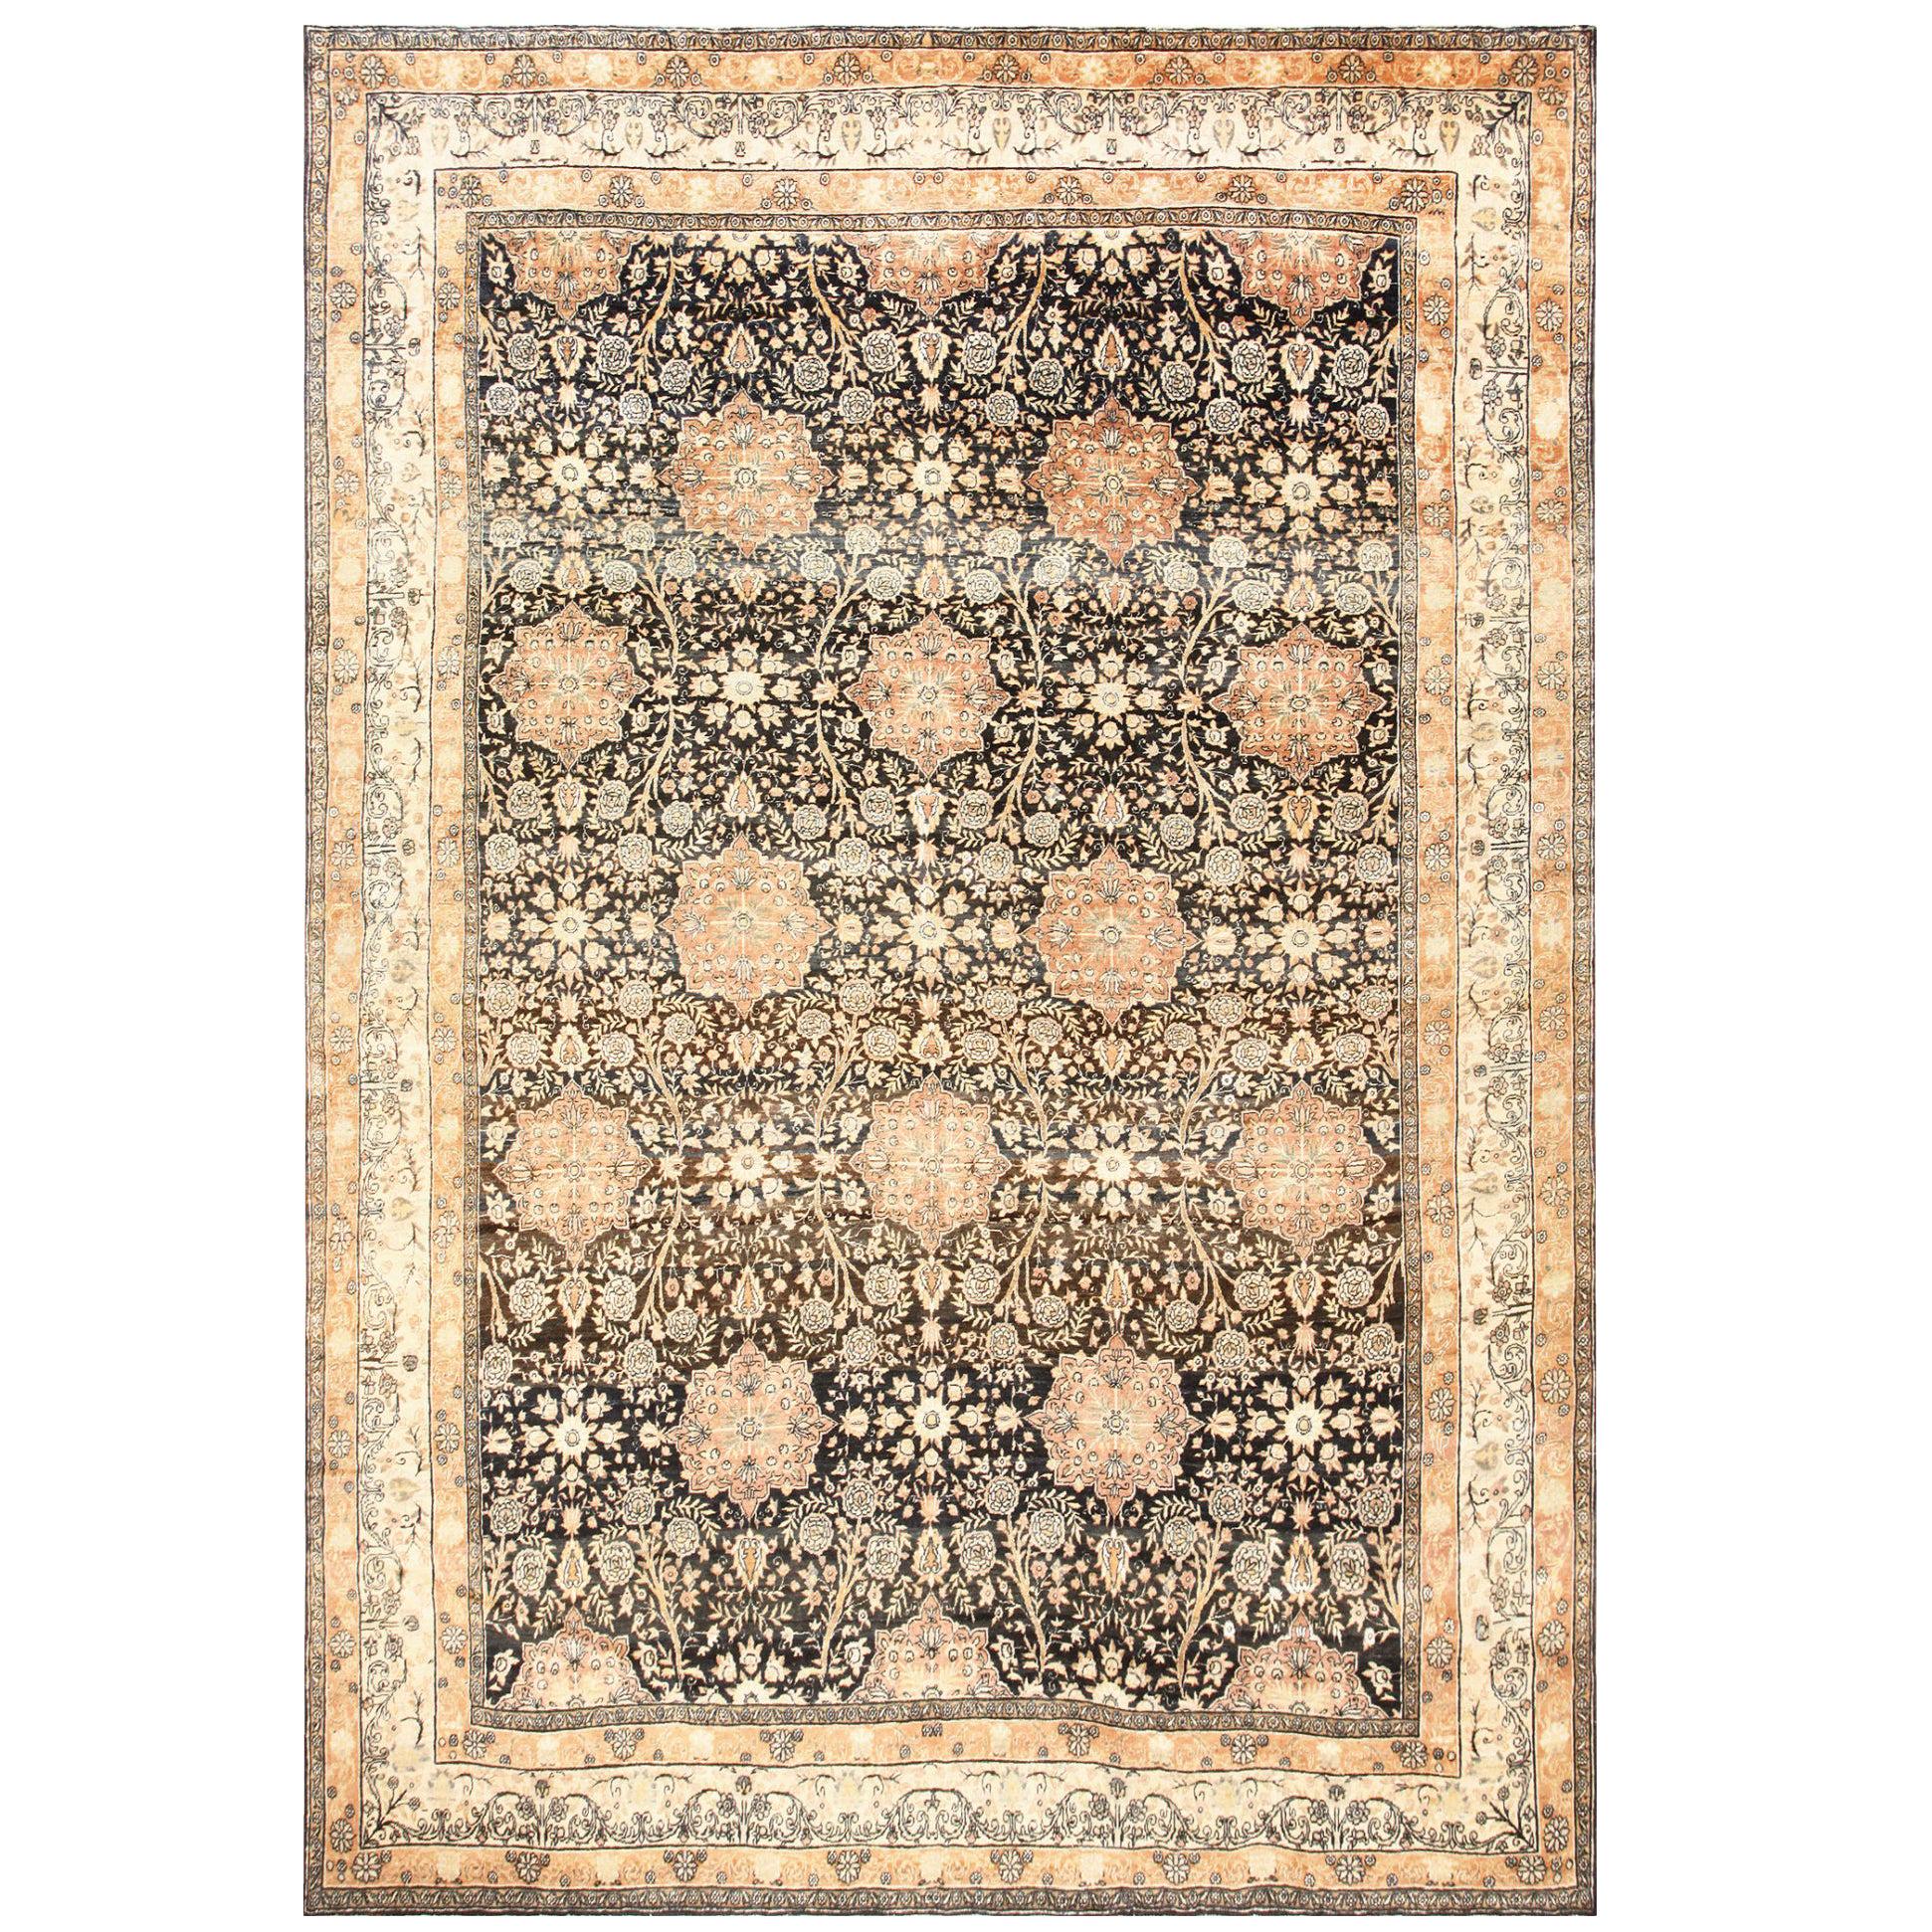 Charcoal Antique Persian Kerman Rug. Size: 9 ft 9 in x 14 ft 6 in